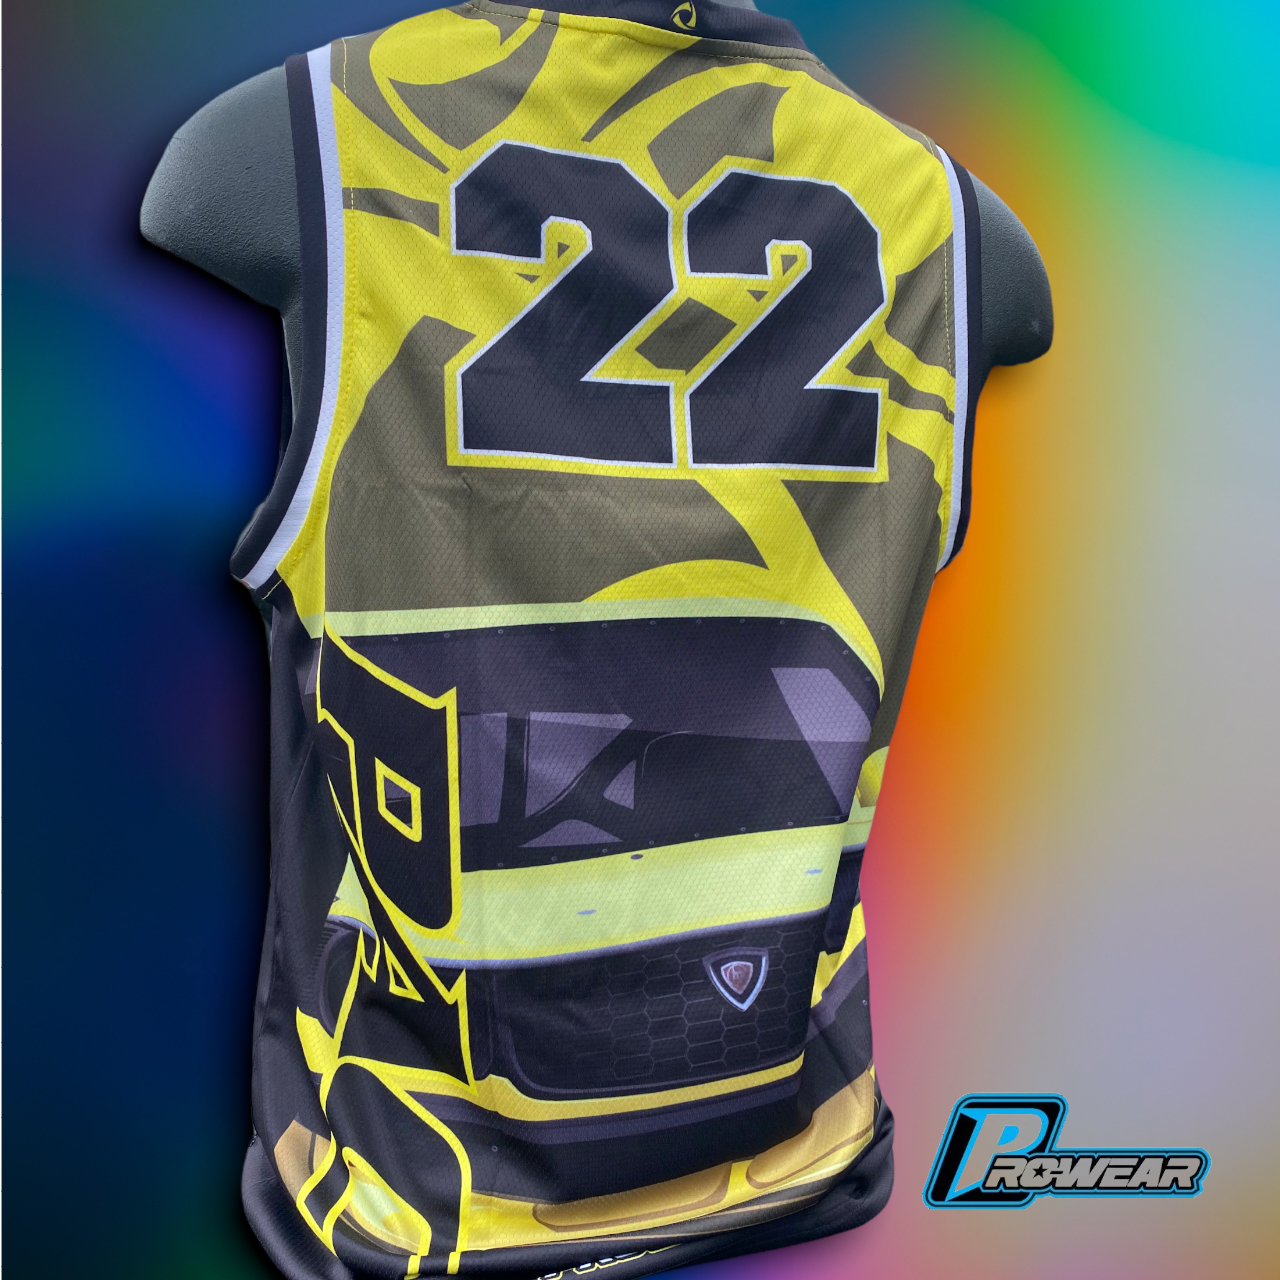 PAC Sublimated Singlets